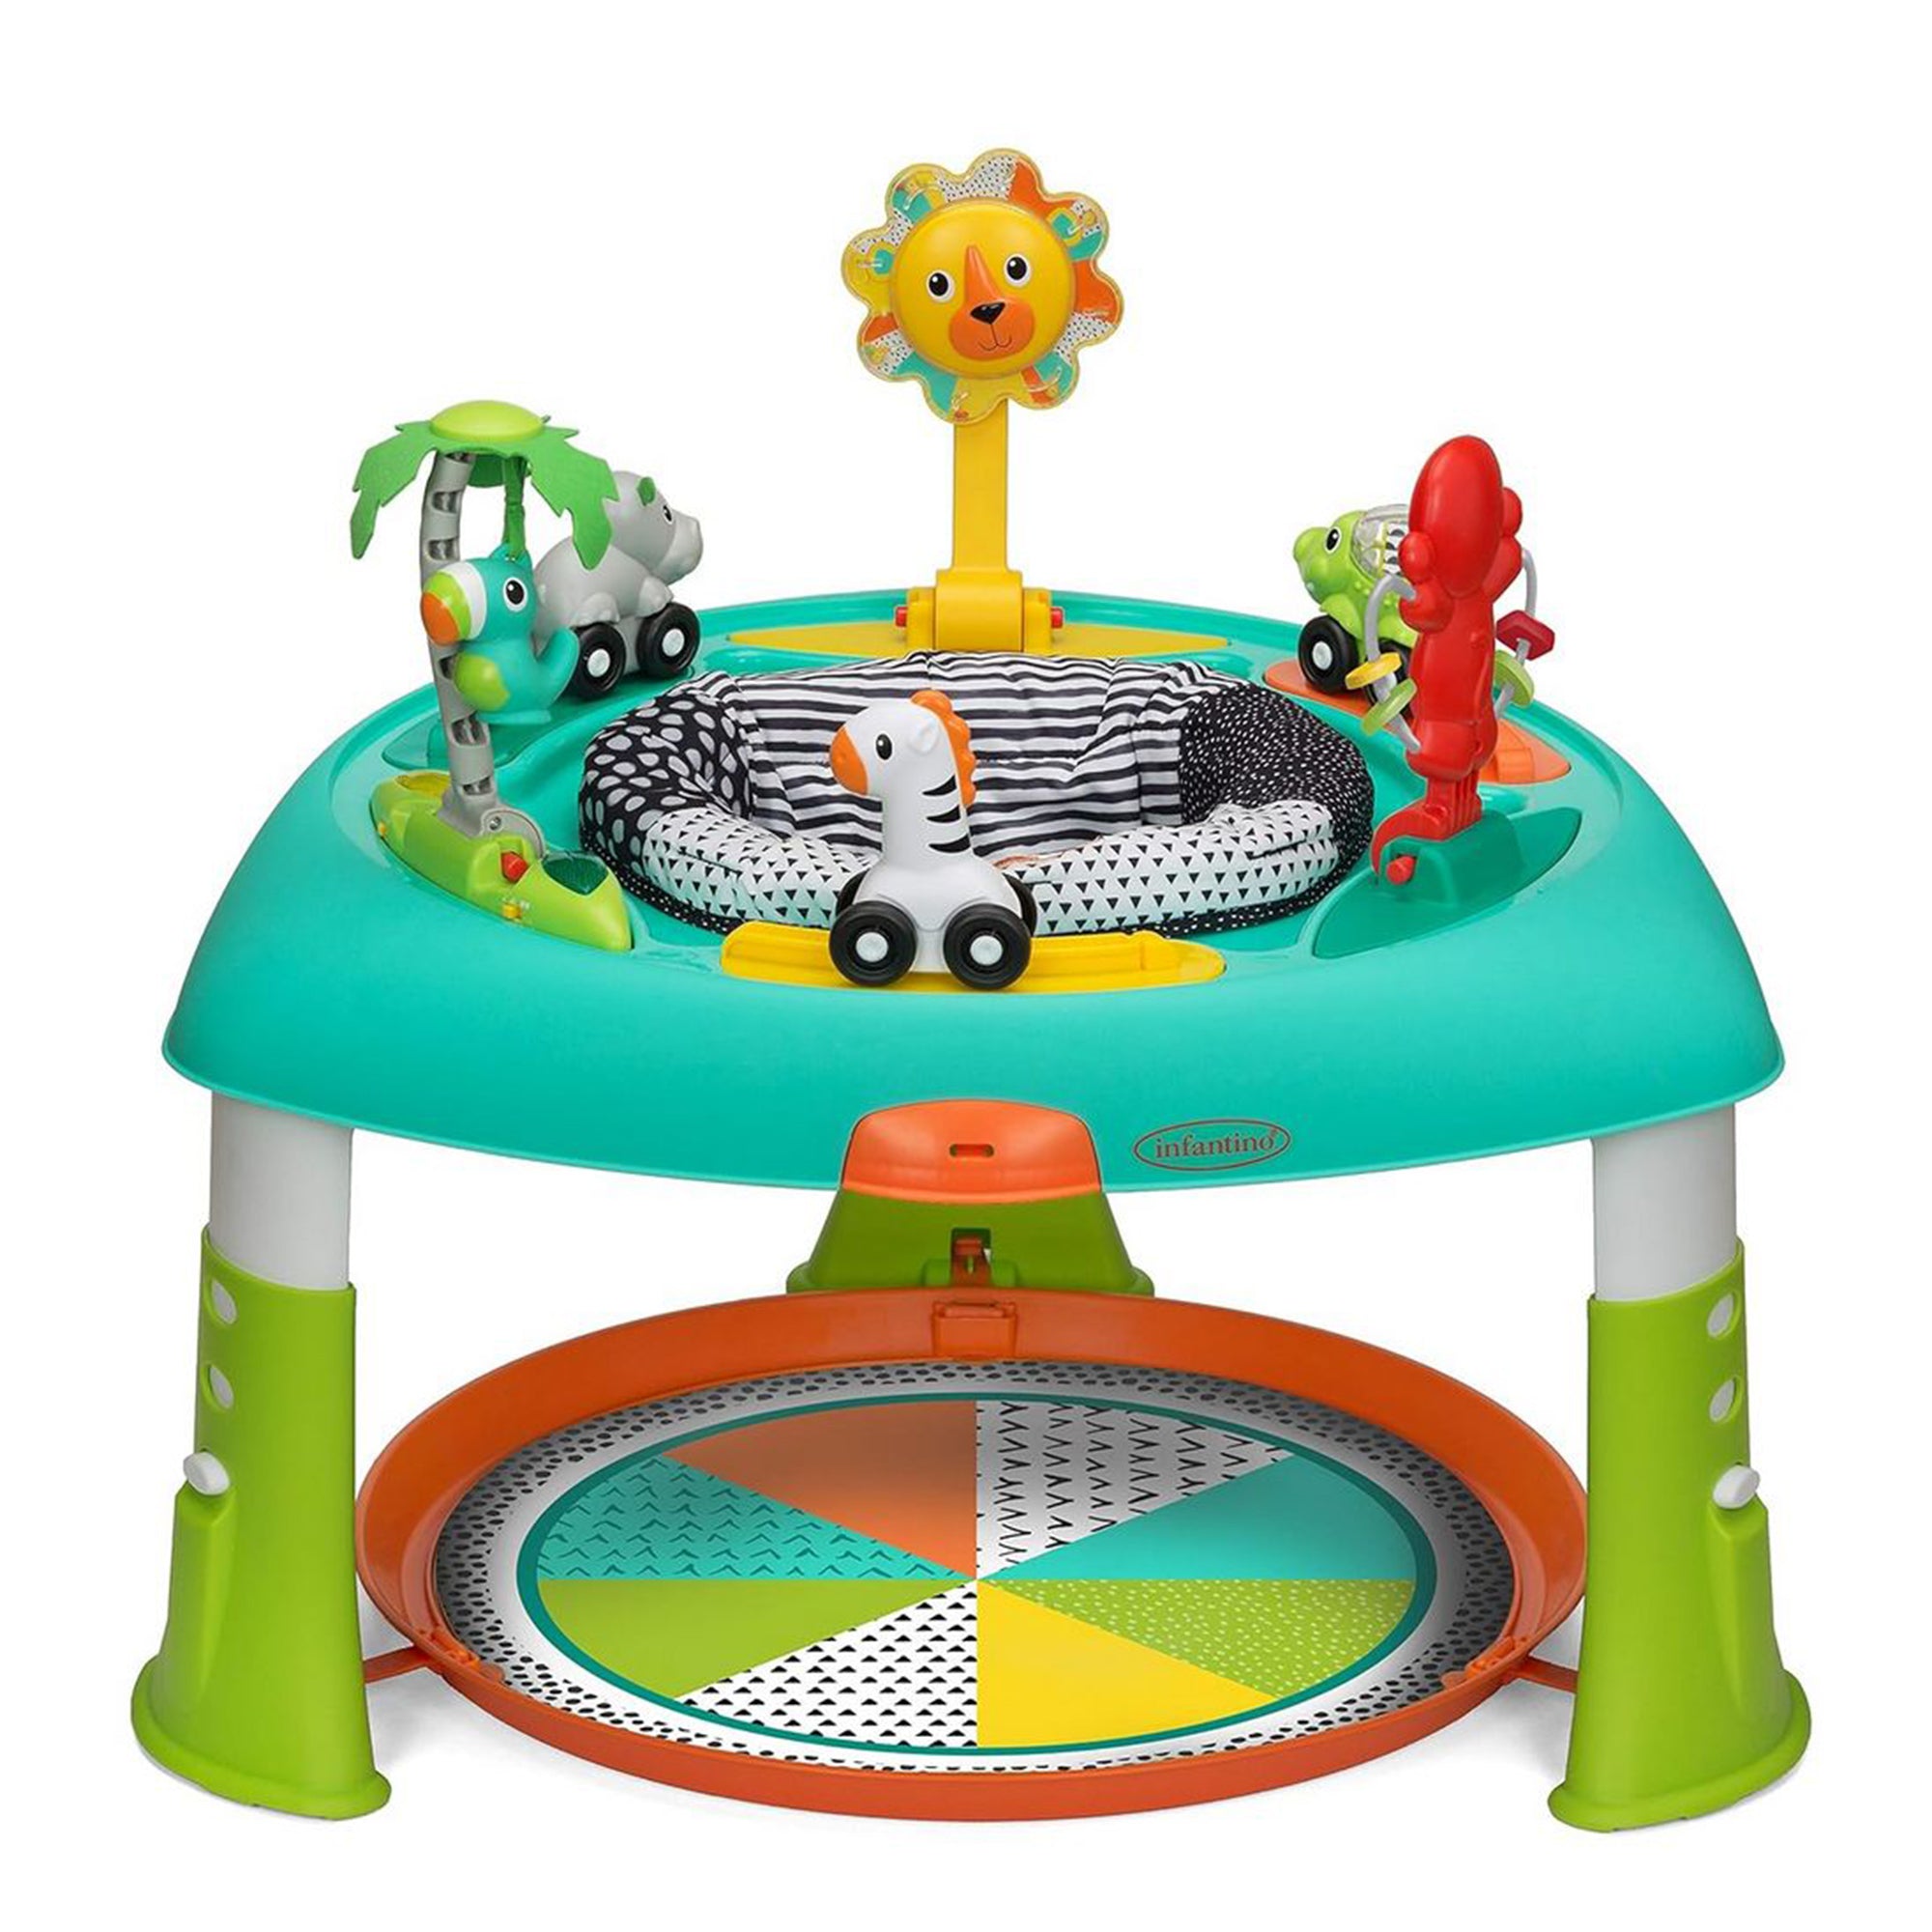 Infantino 2-in-1 Sit Spin and Stand Entertainer and Activity Table - Multicolor - 4 months to 5 Years